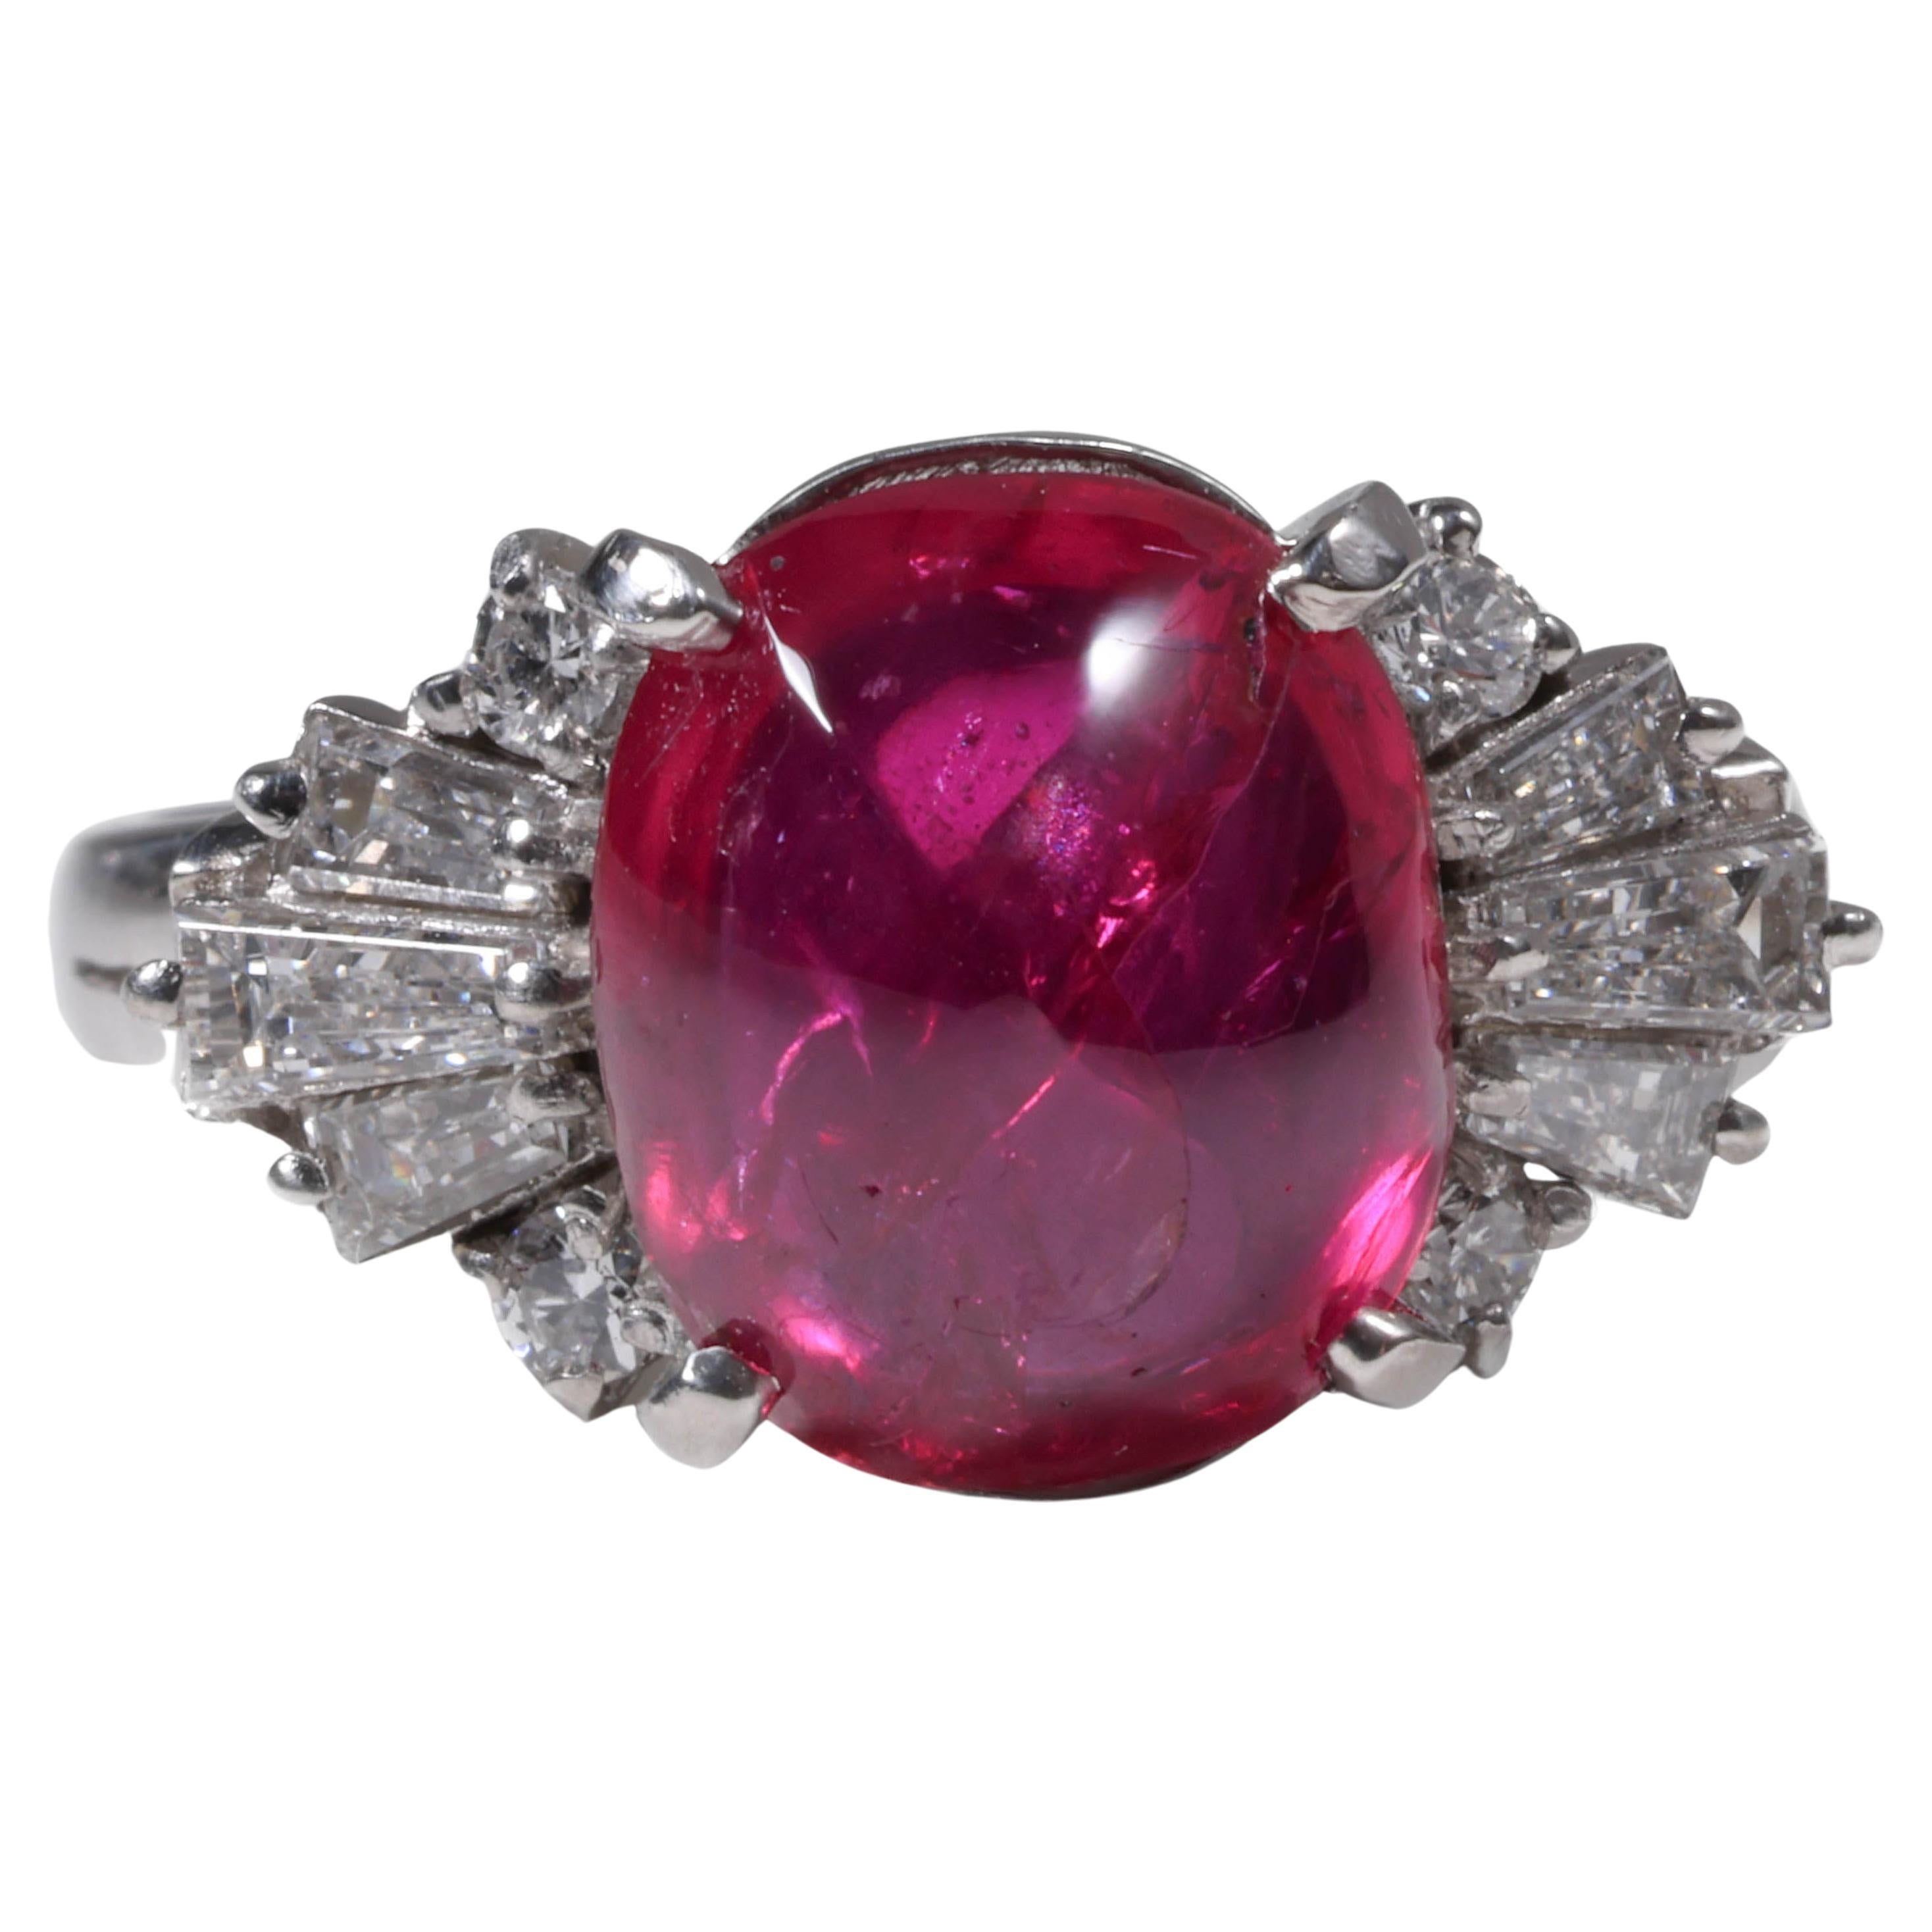 Burma Ruby No-Heat 4.75 Carats Set in Vintage Platinum Mounting, Certified For Sale